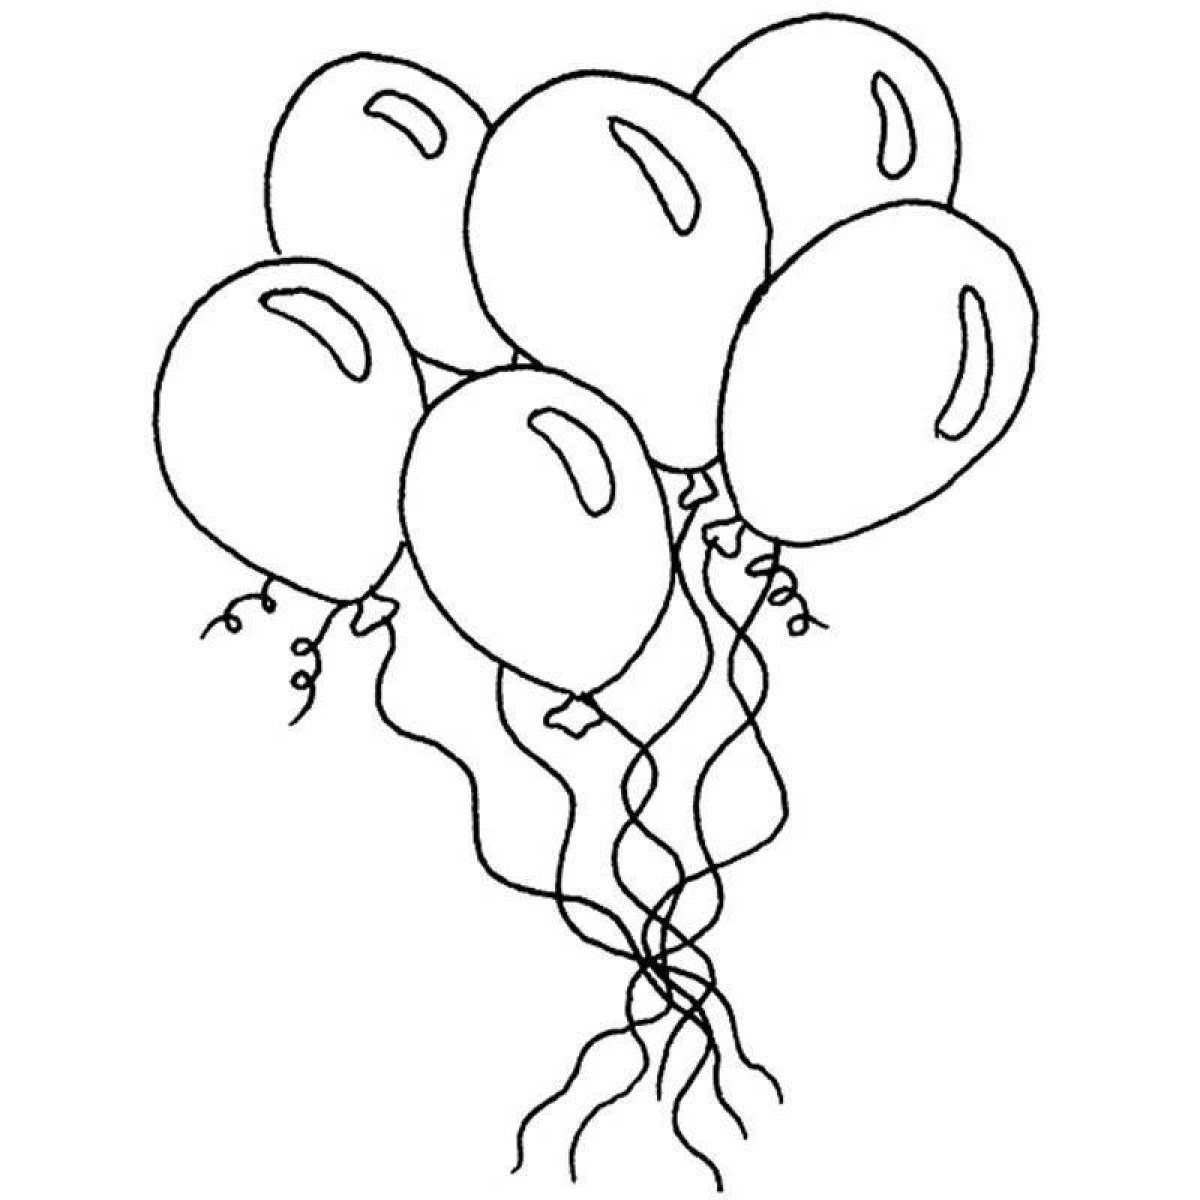 Exciting balloon coloring pages for kids